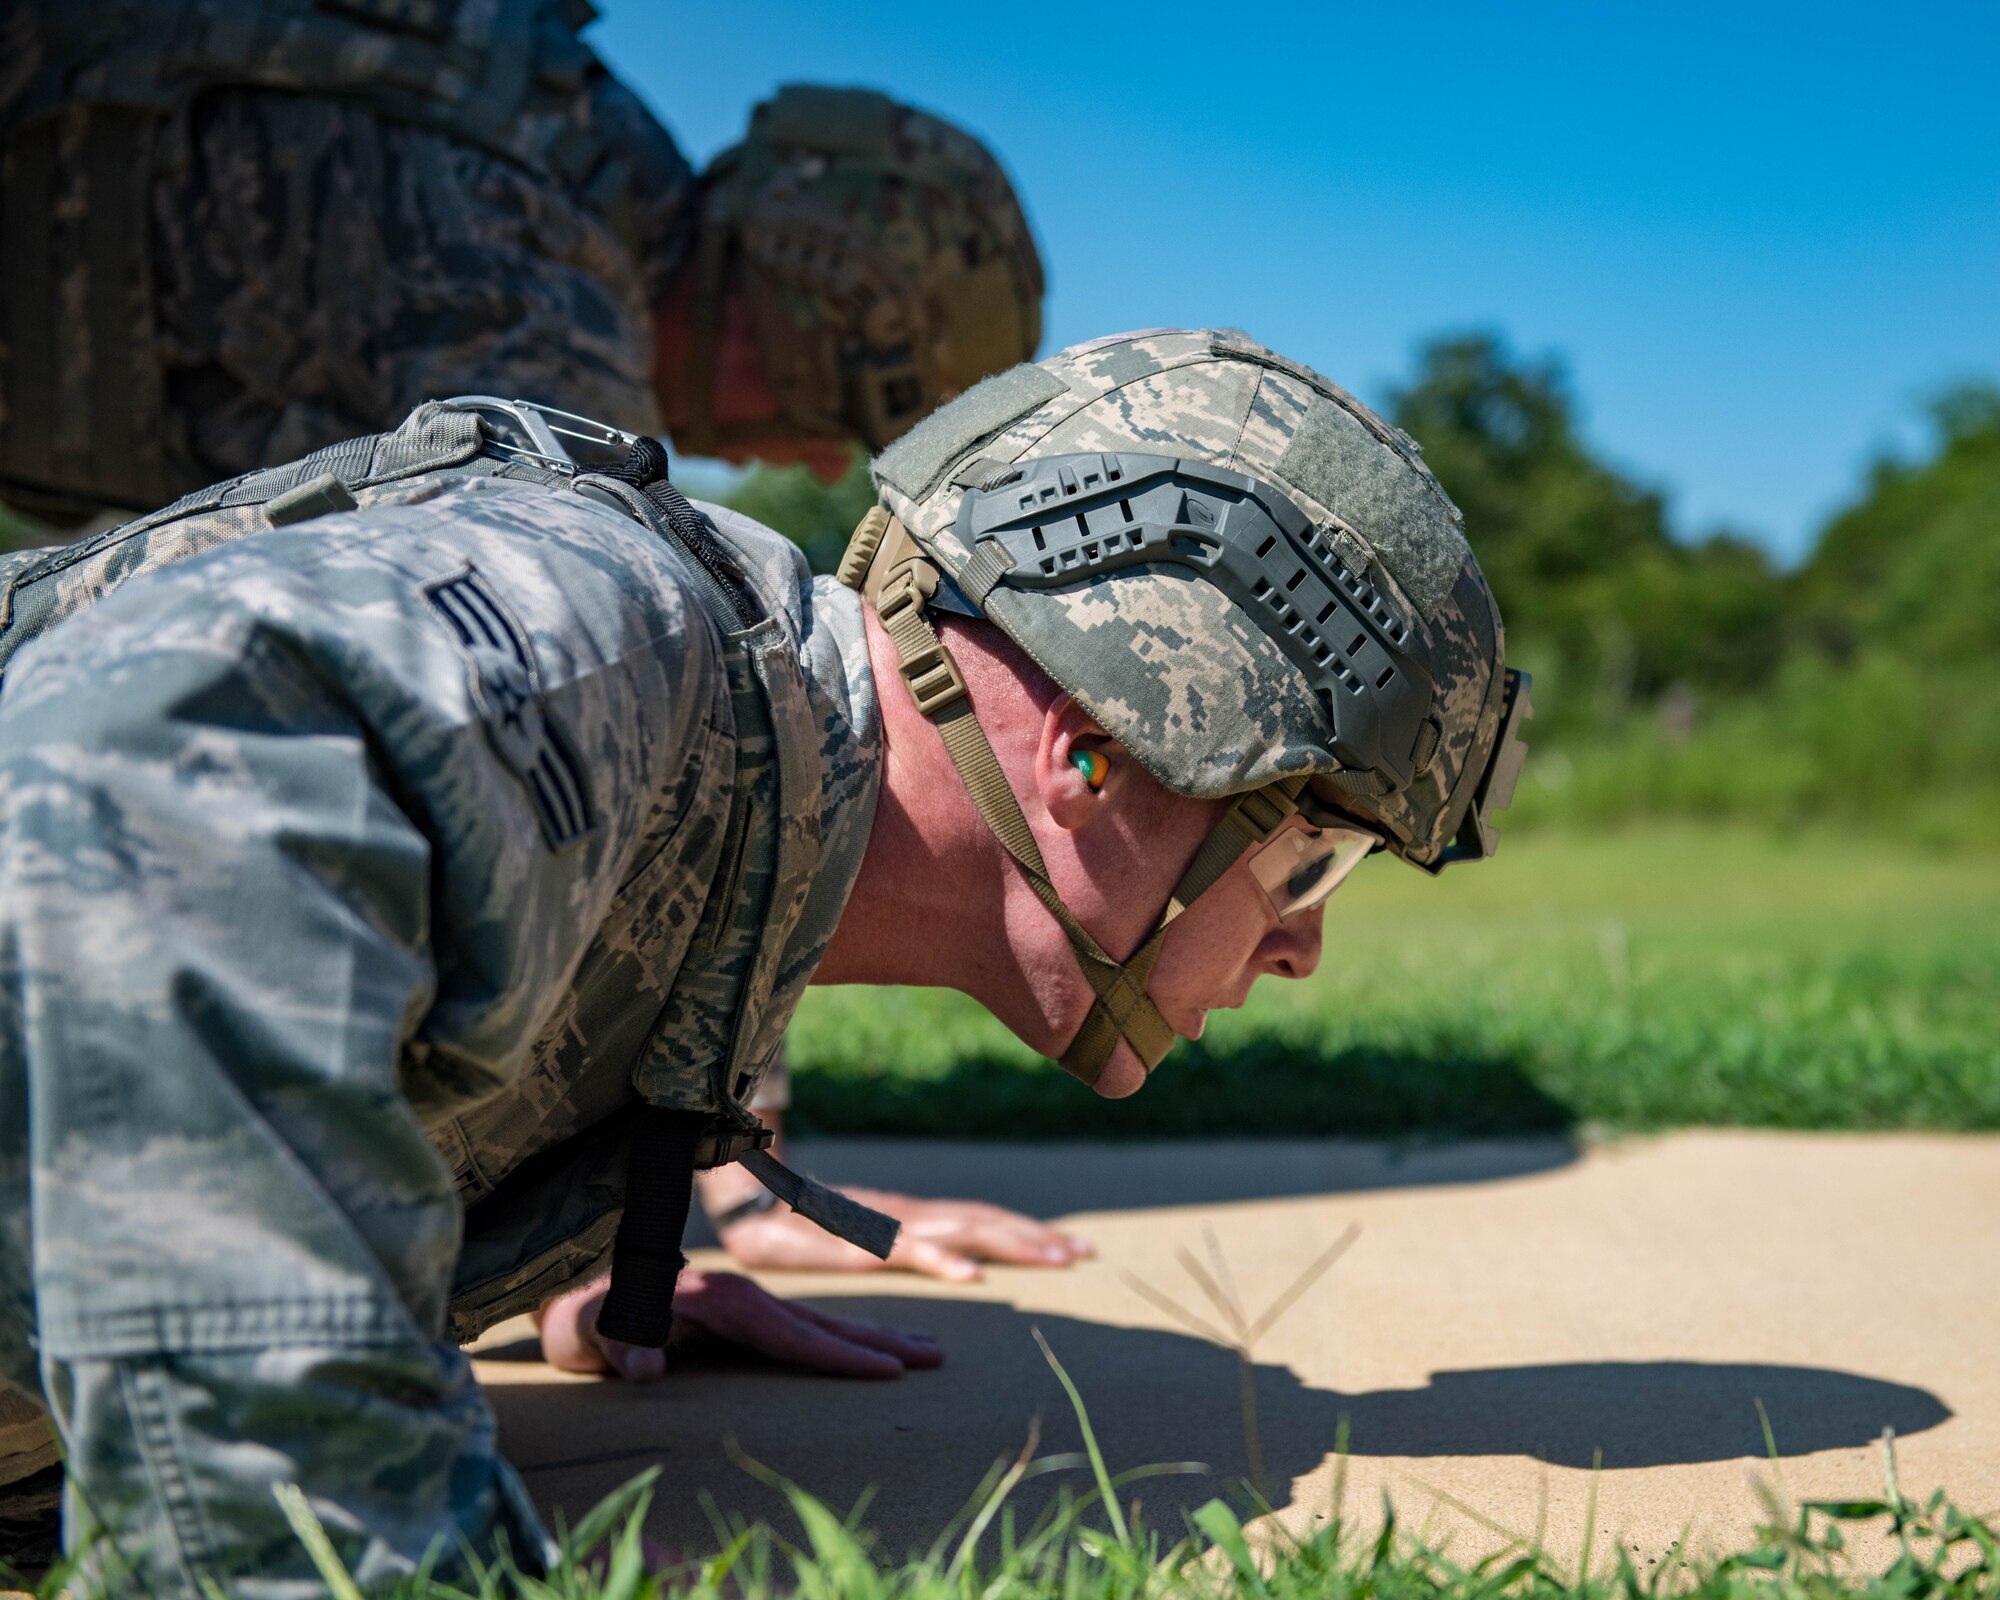 U.S. Air Force Senior Airman Aaron Lee, 9th Security Forces Squadron patrolman, performs pushups during Air Combat Command’s Defender Challenge team selection at Joint Base Langley-Eustis, Virginia, August 24, 2018.